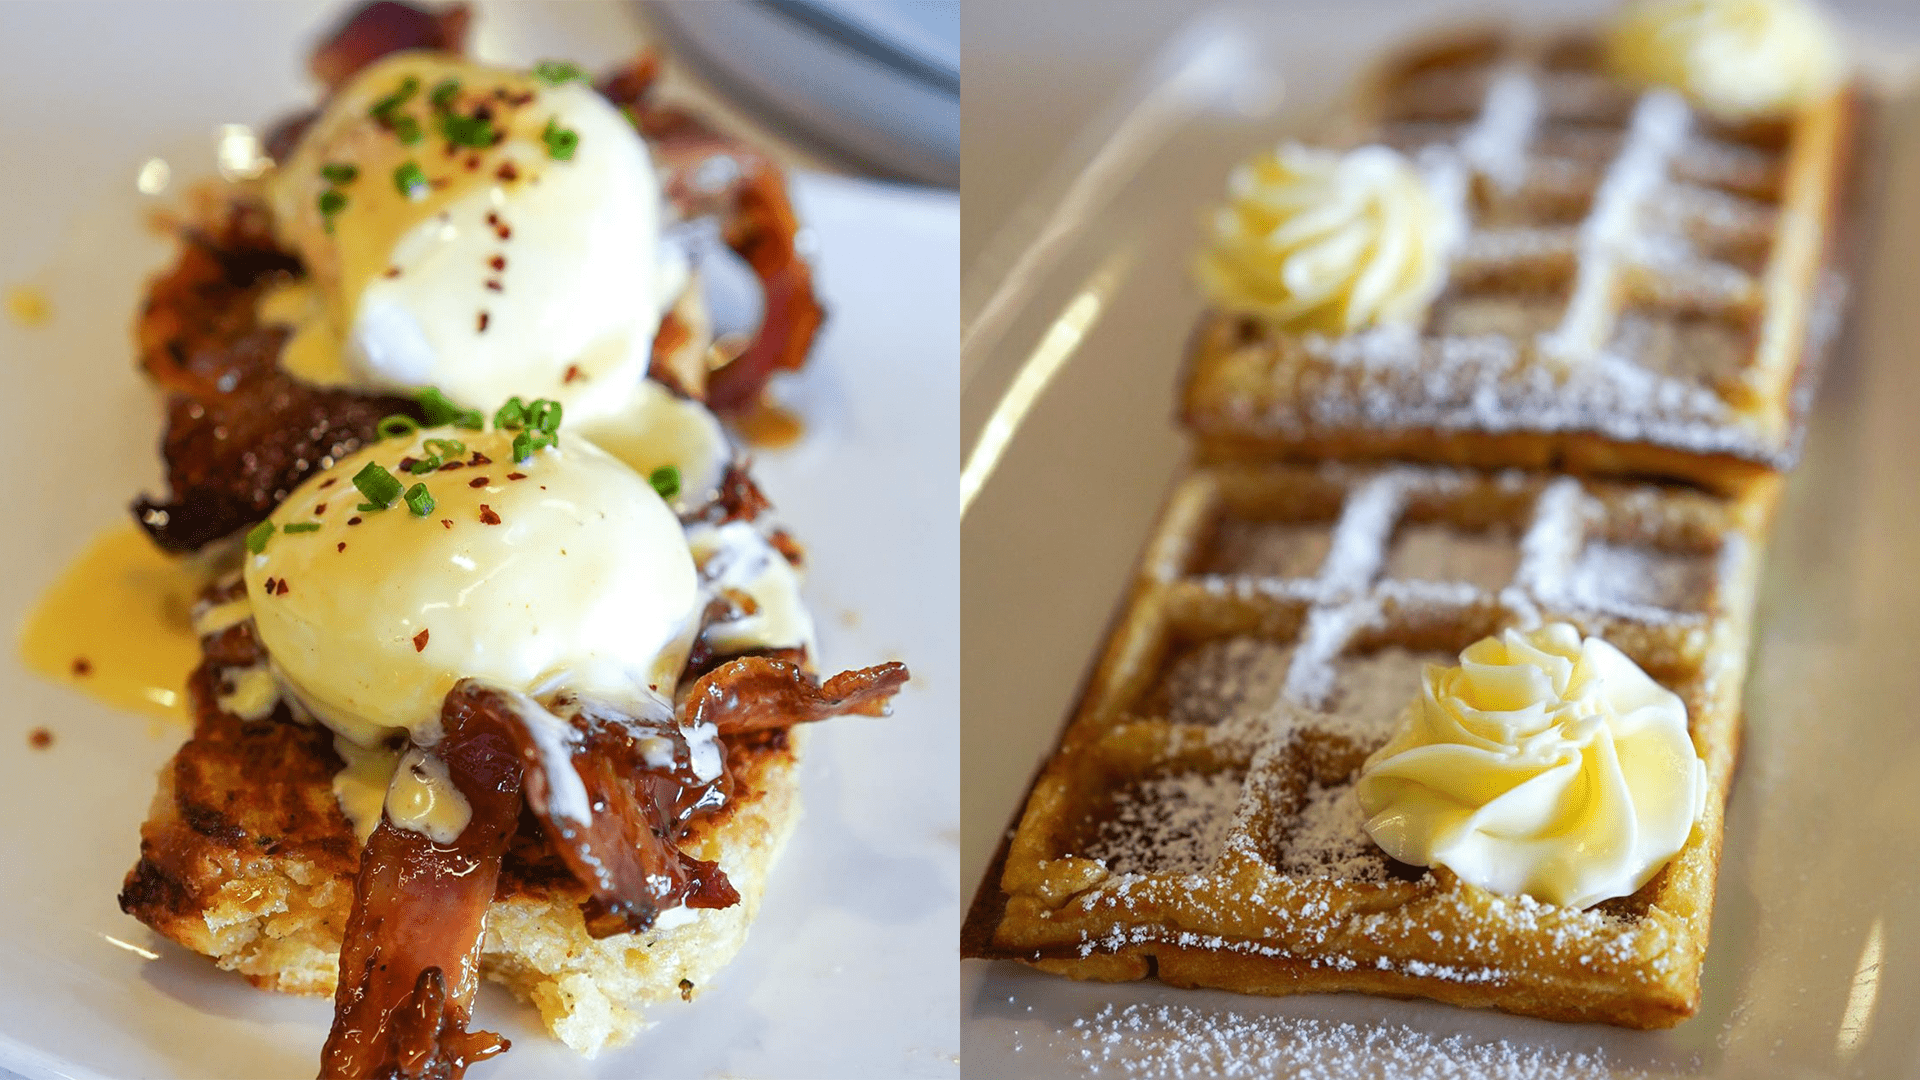 Weekday brunch arrives at two of Tampa’s hottest restaurants